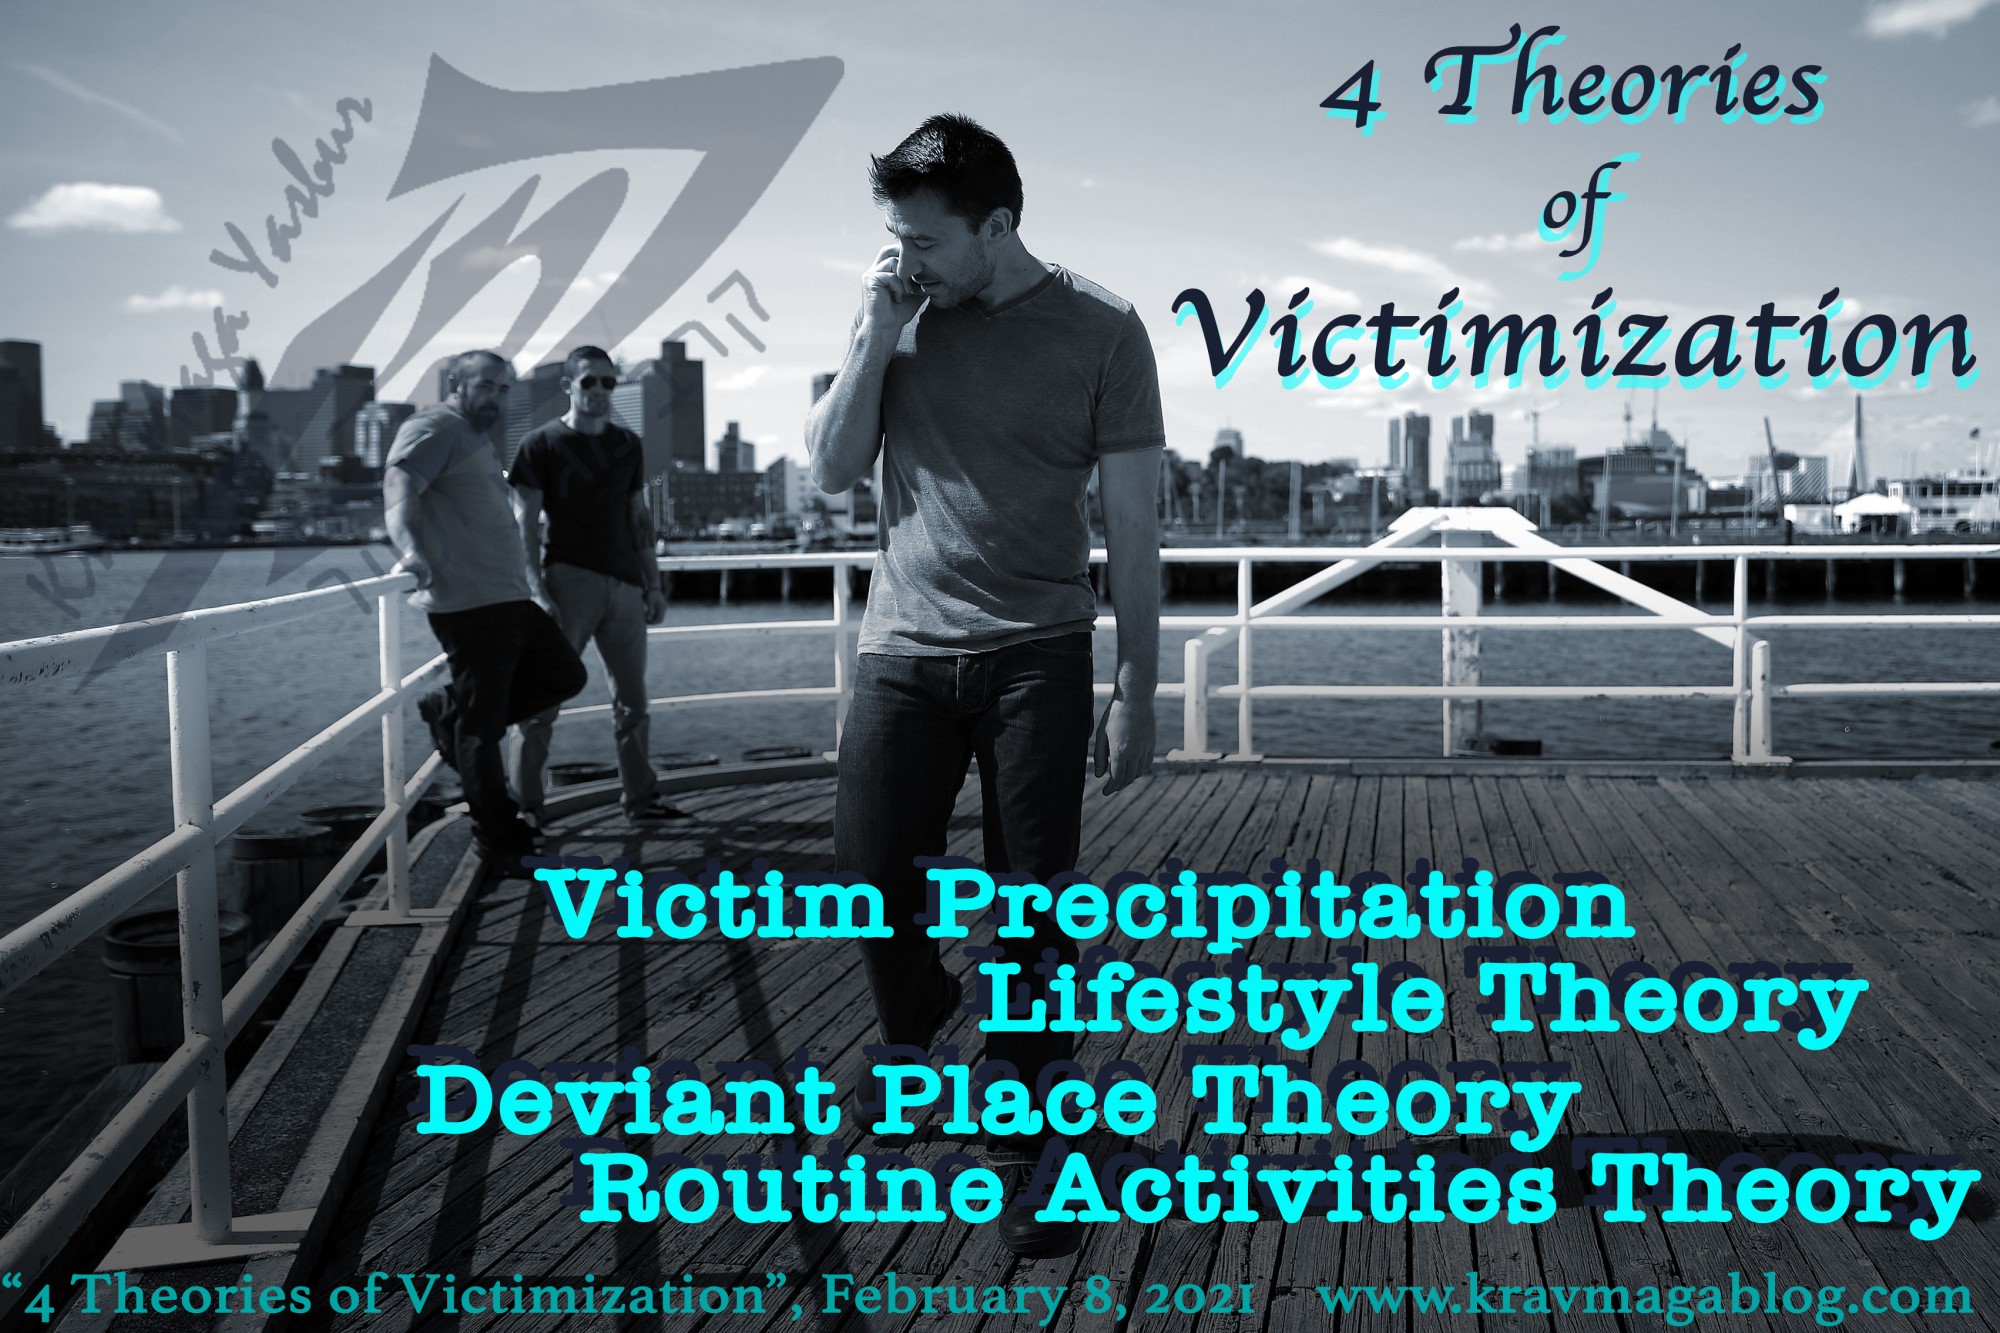 Blog About Four Theories of Victimization